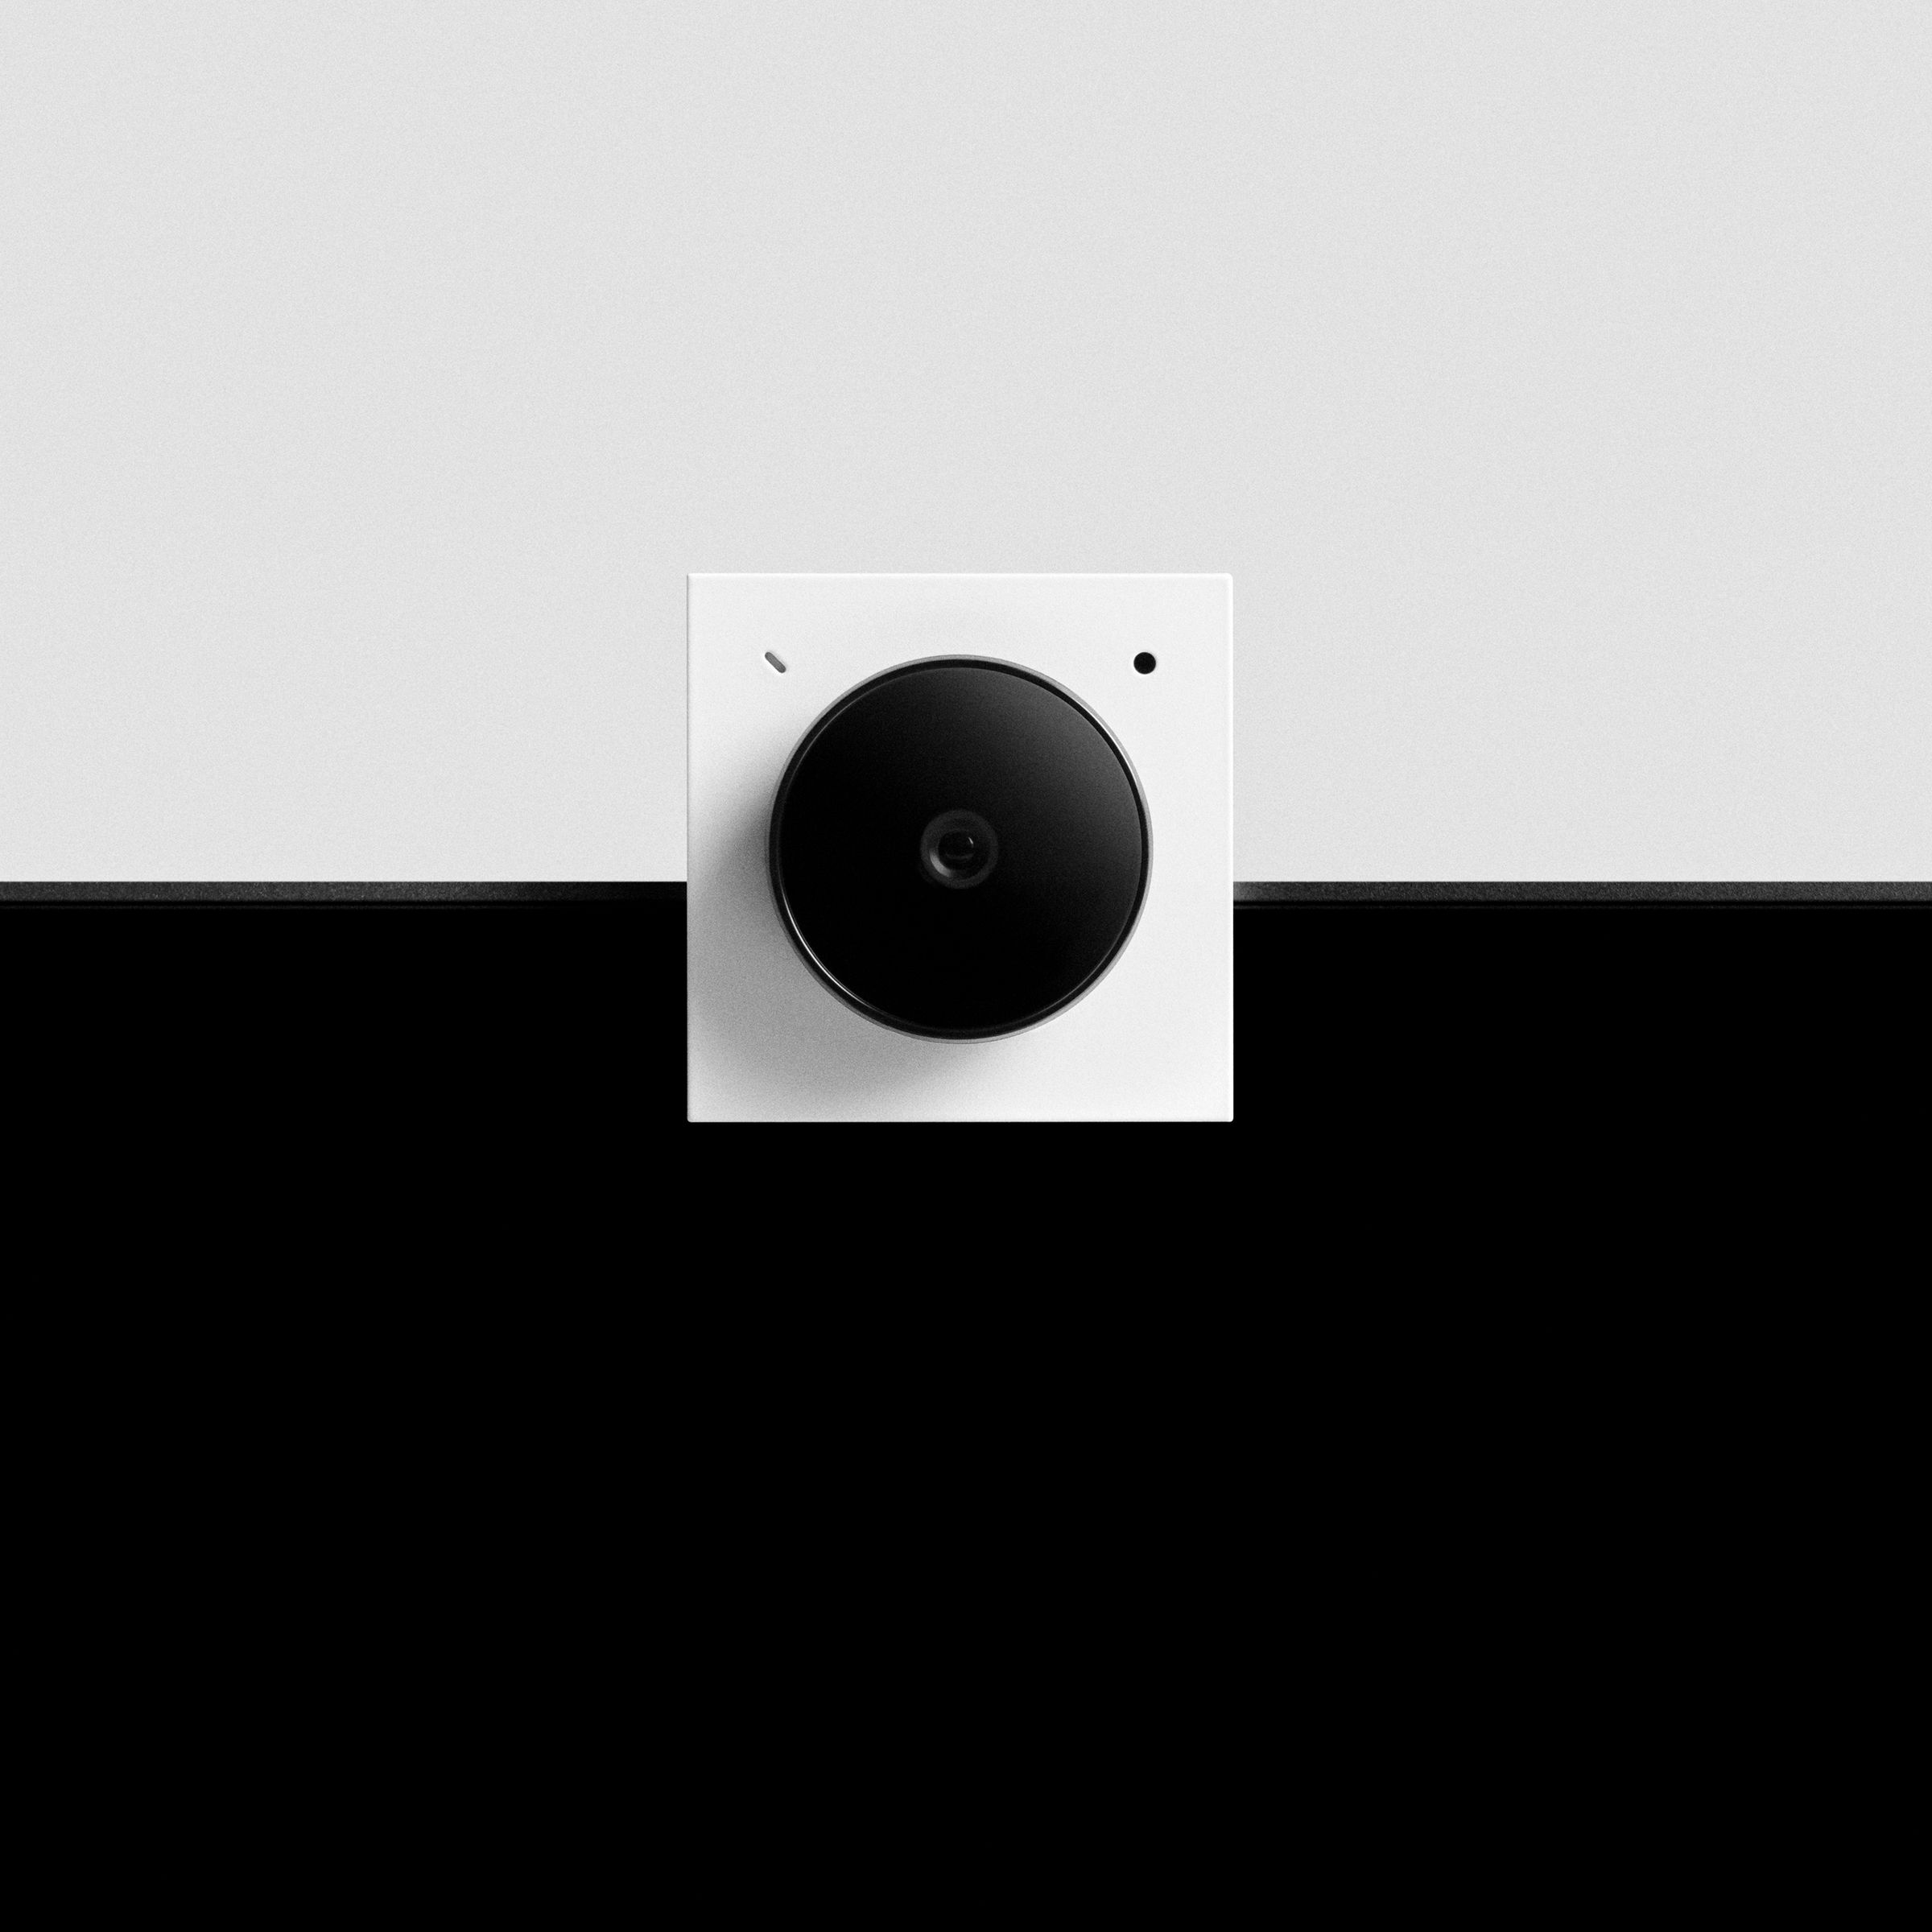 An image of a small camera attached to a laptop screen.